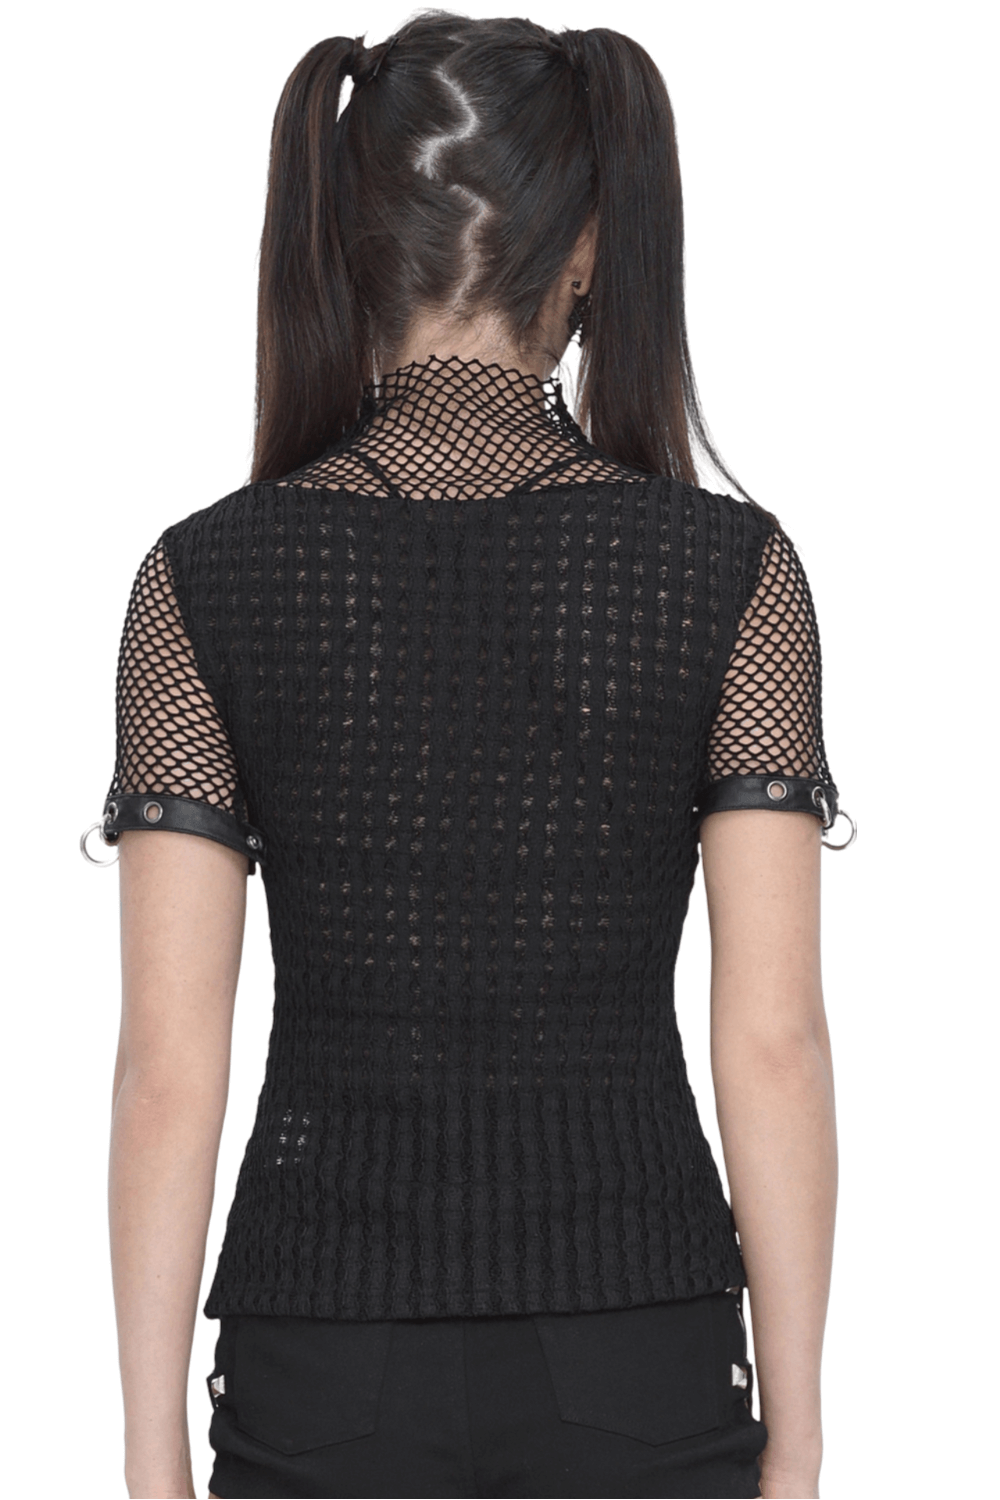 Punk Women's Zip-Up Mesh T-shirt with O-rings on Sleeves